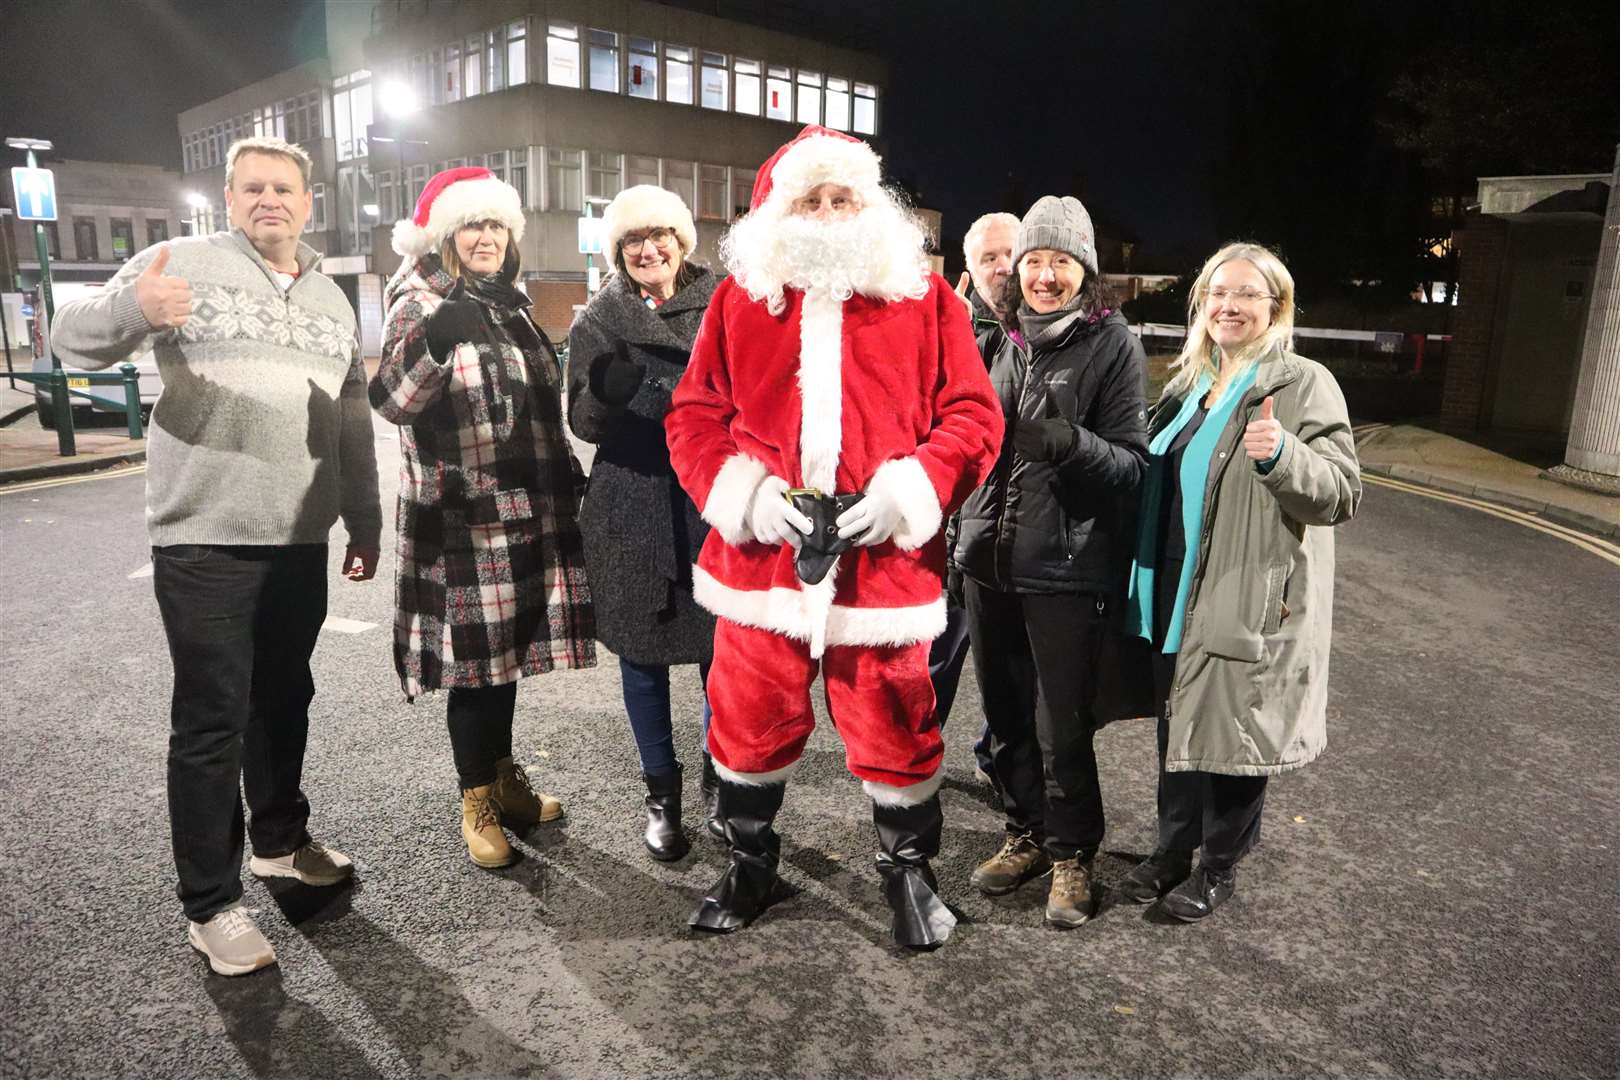 Santa and his sleigh team - without the sleigh - in Sittingbourne